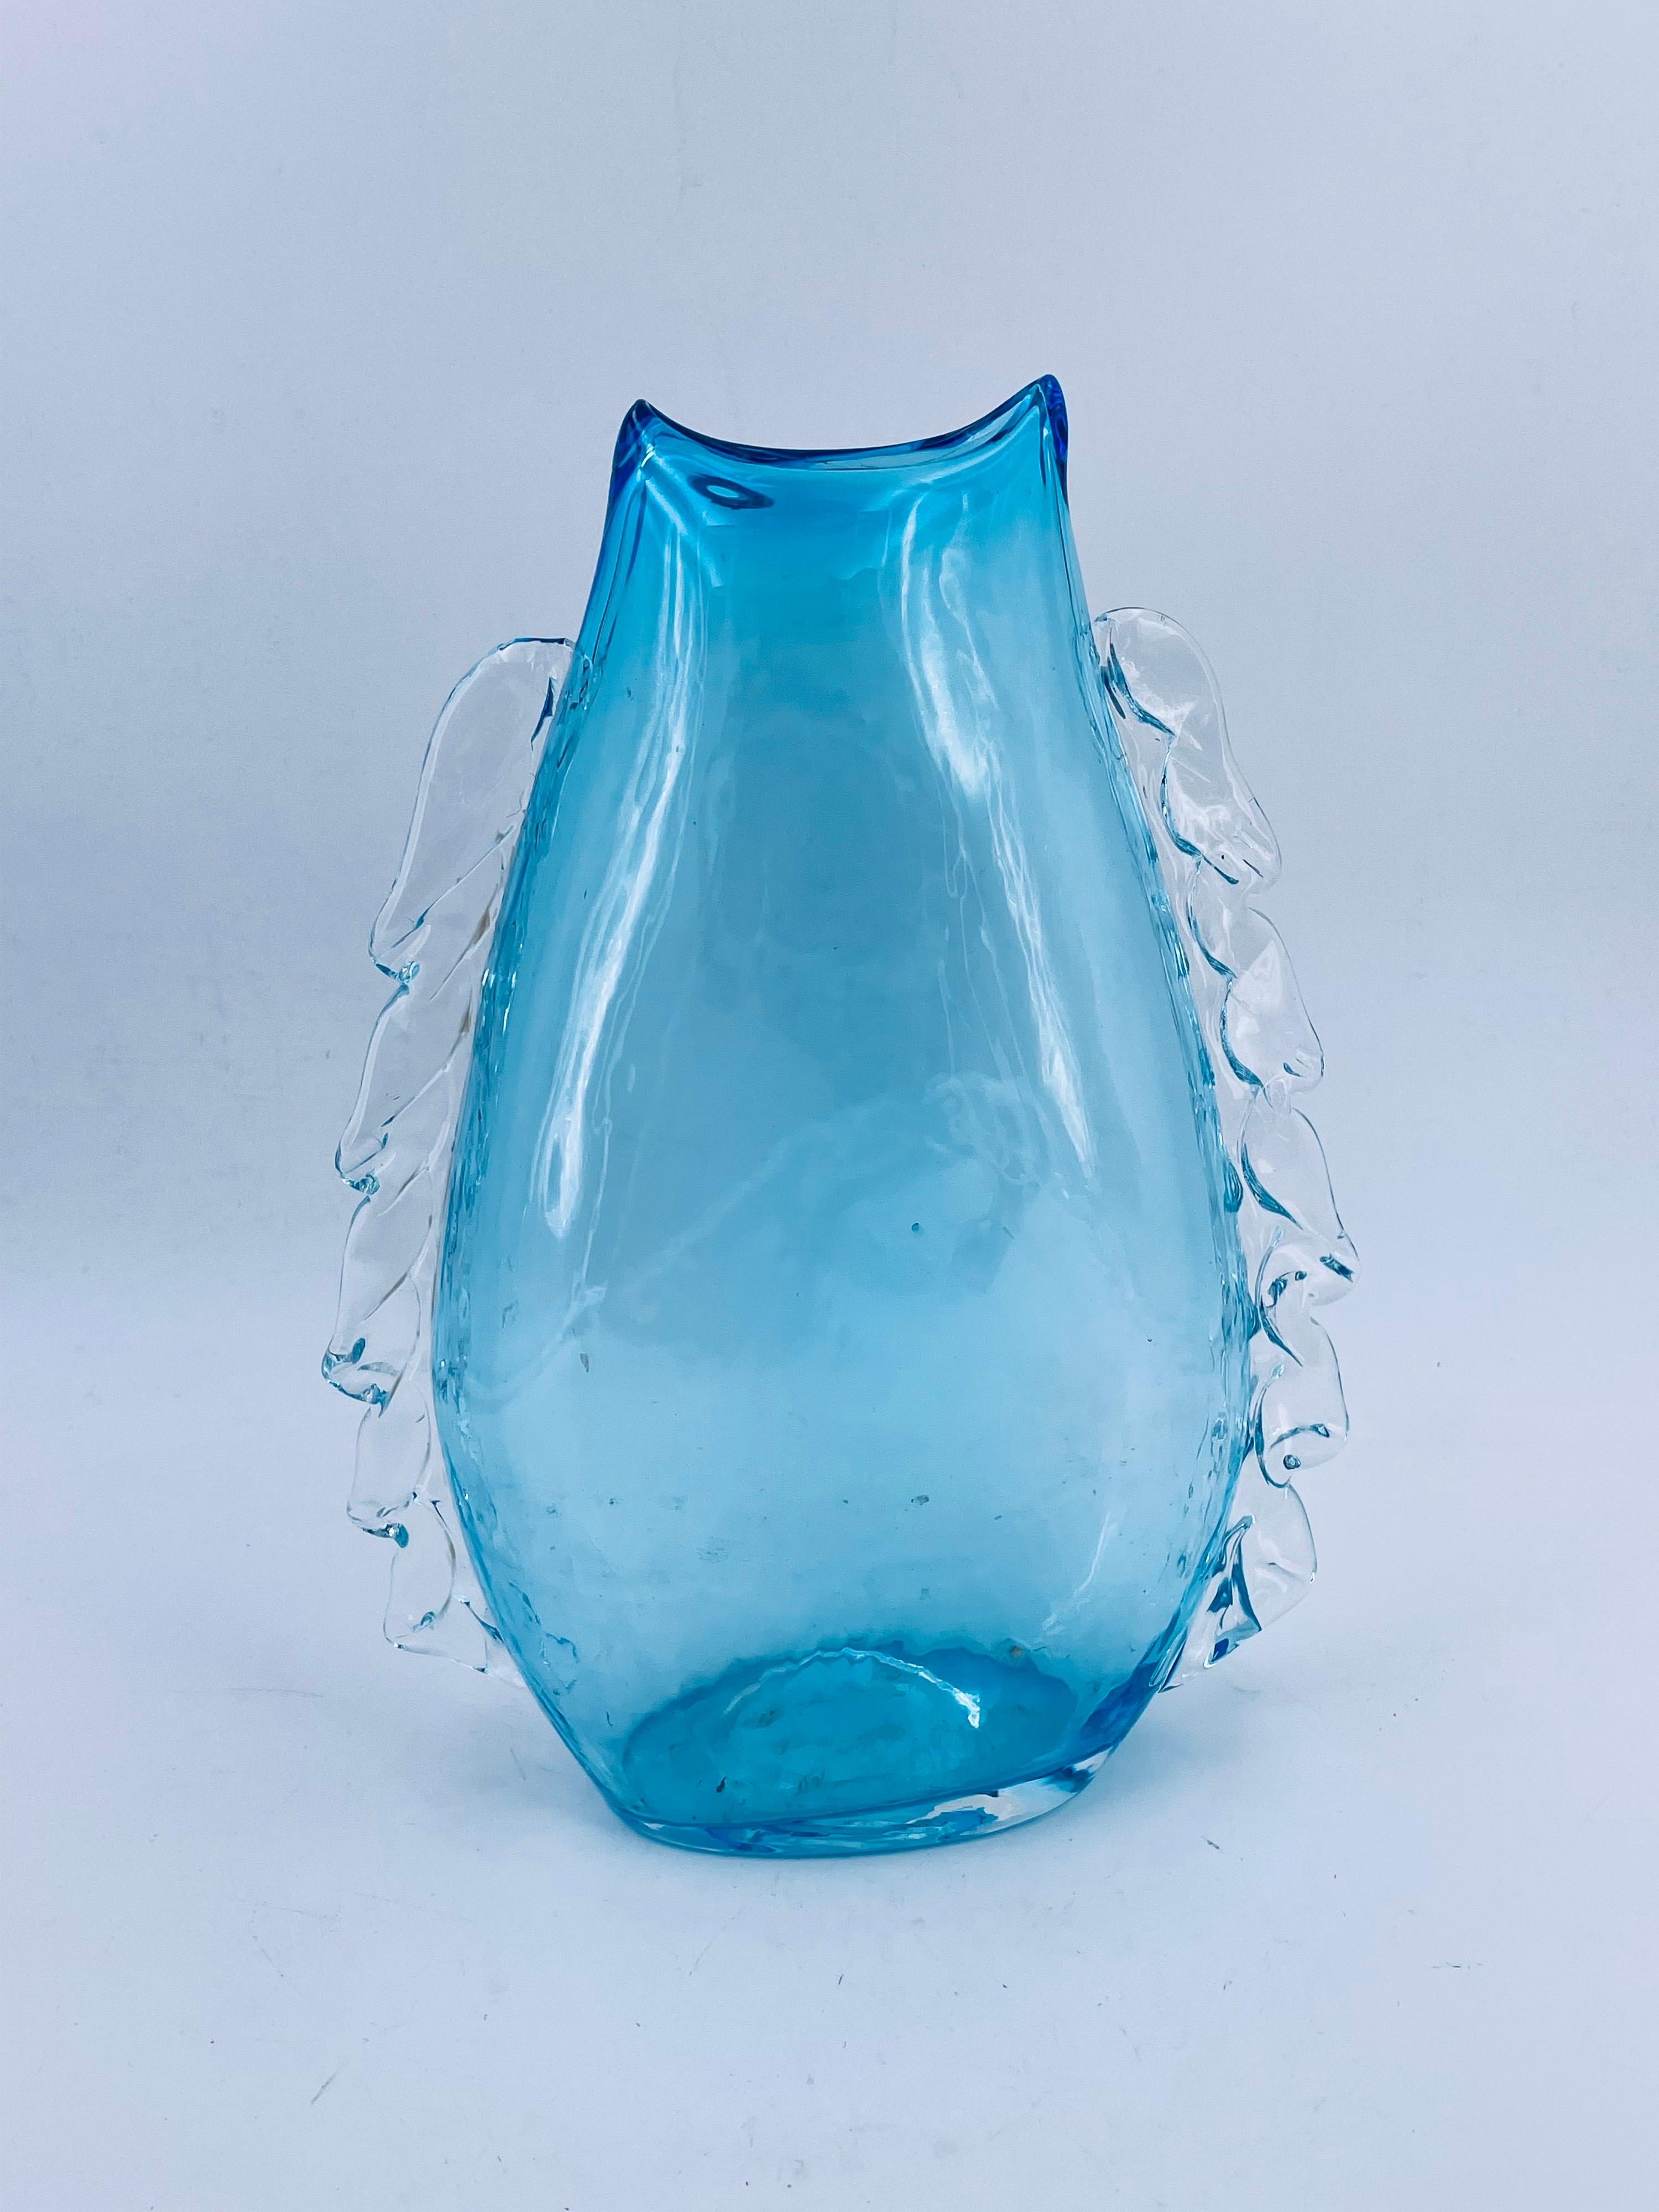 North American 1970's Mouth blown Glass Vase by Blenko